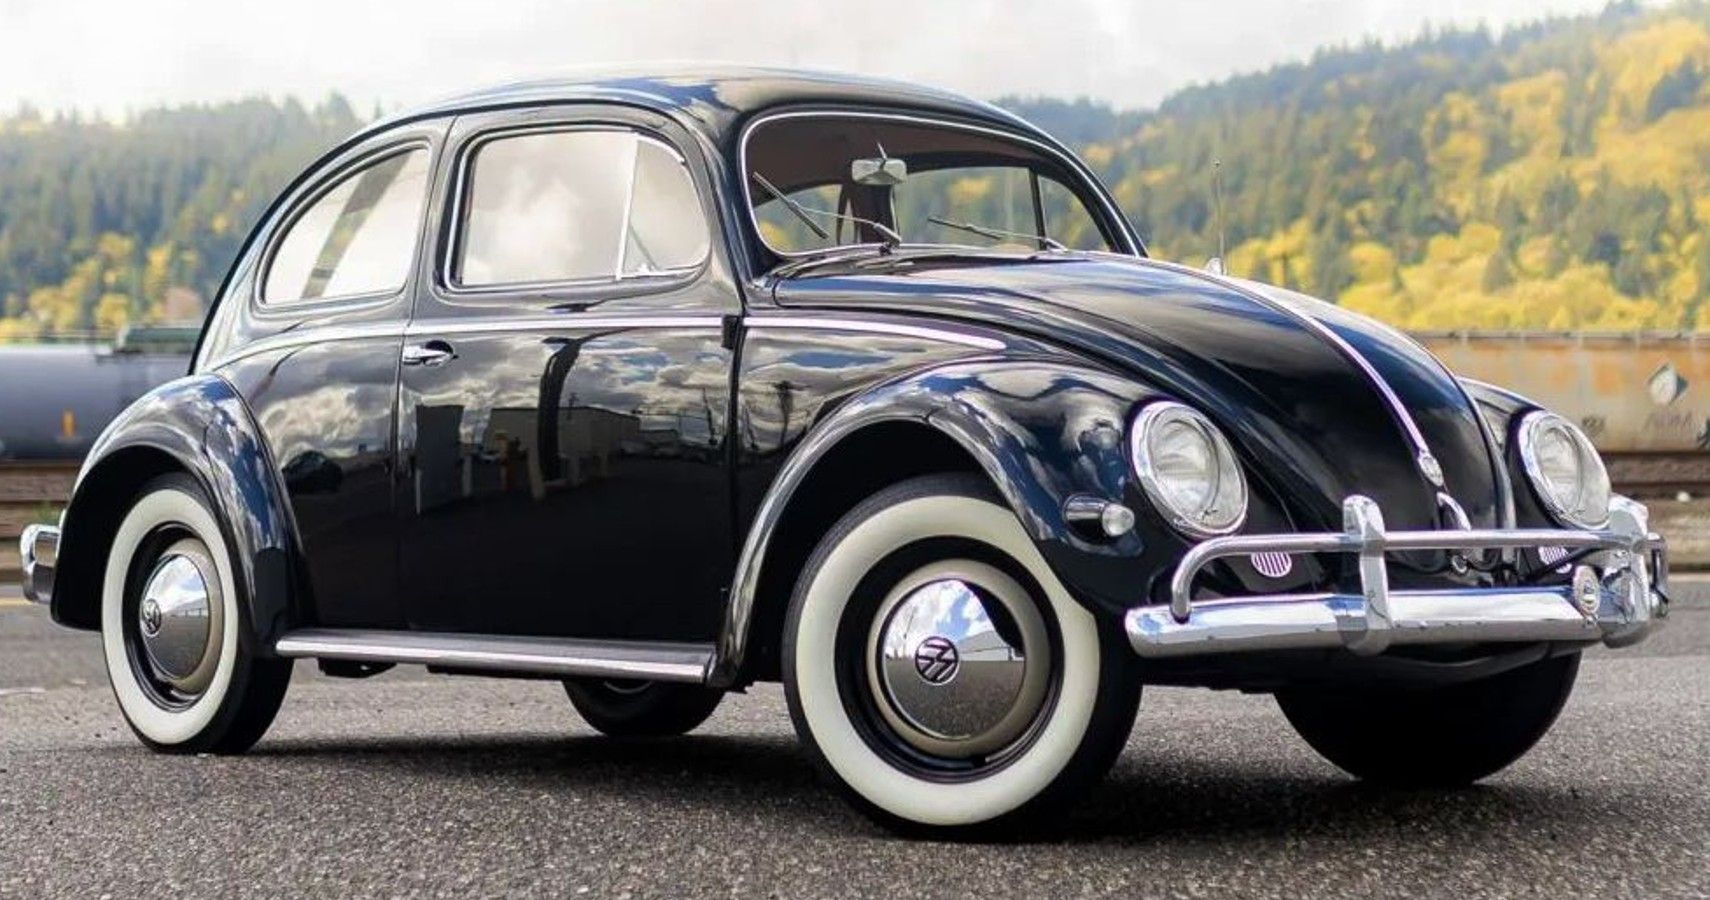 10 Cars That Changed The Automotive Industry Forever